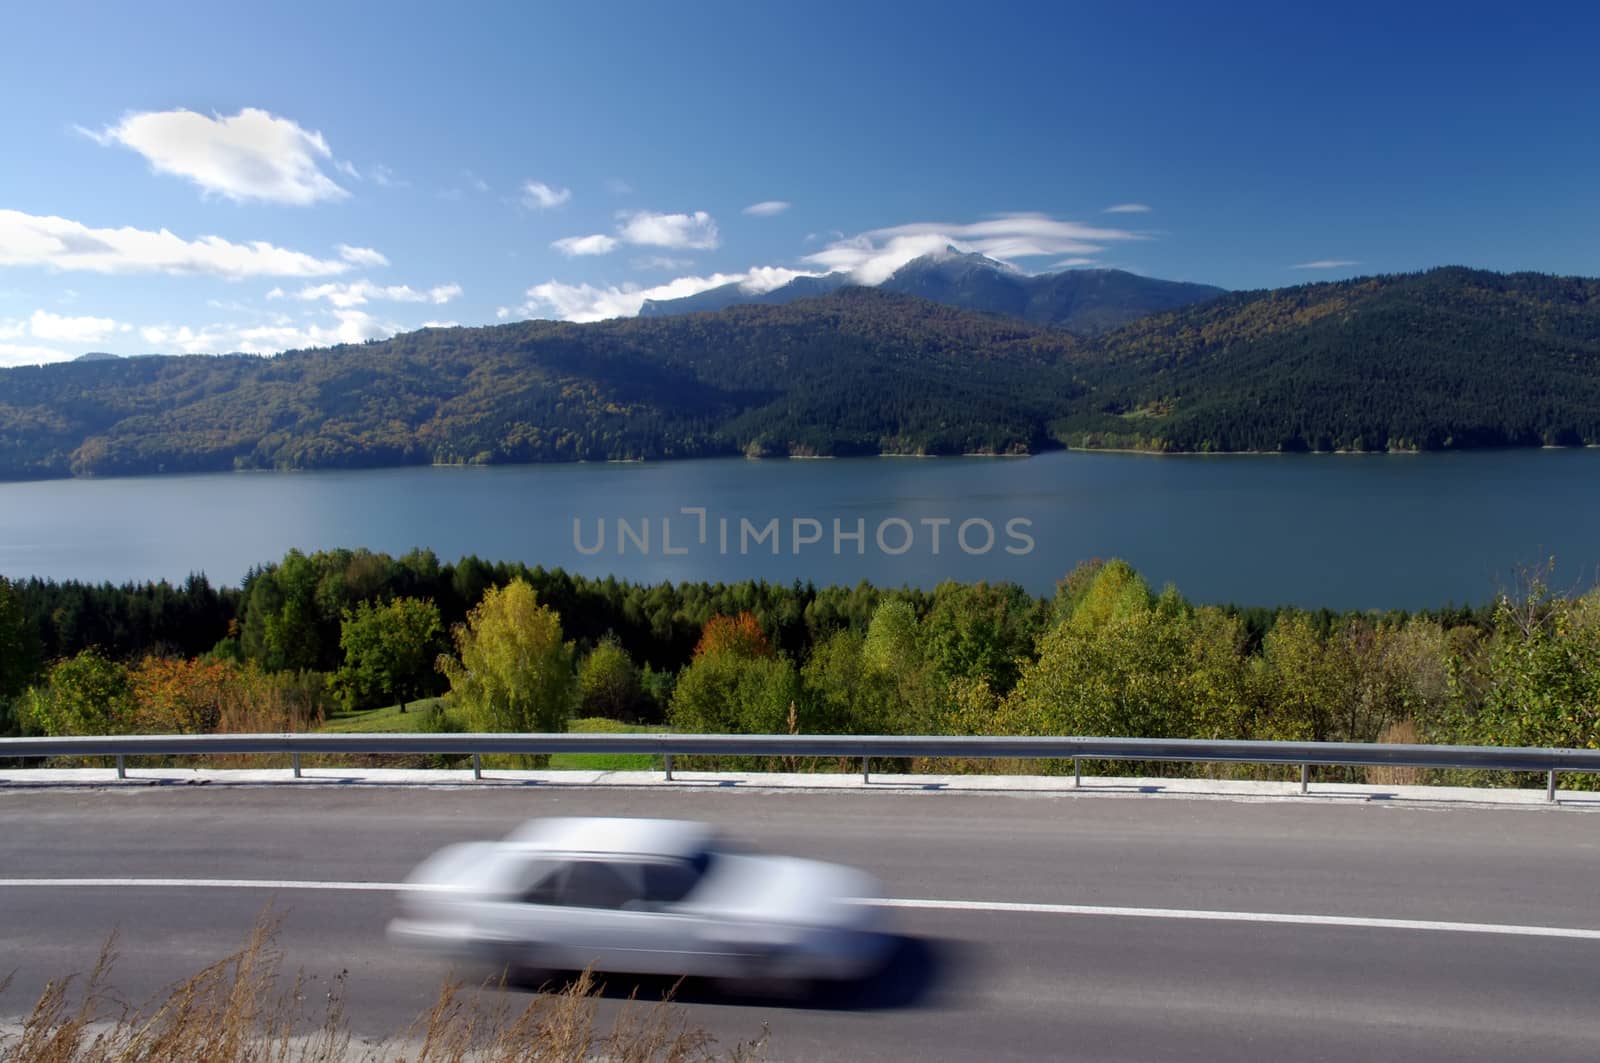 Moving car on road in autumn mountain landscape